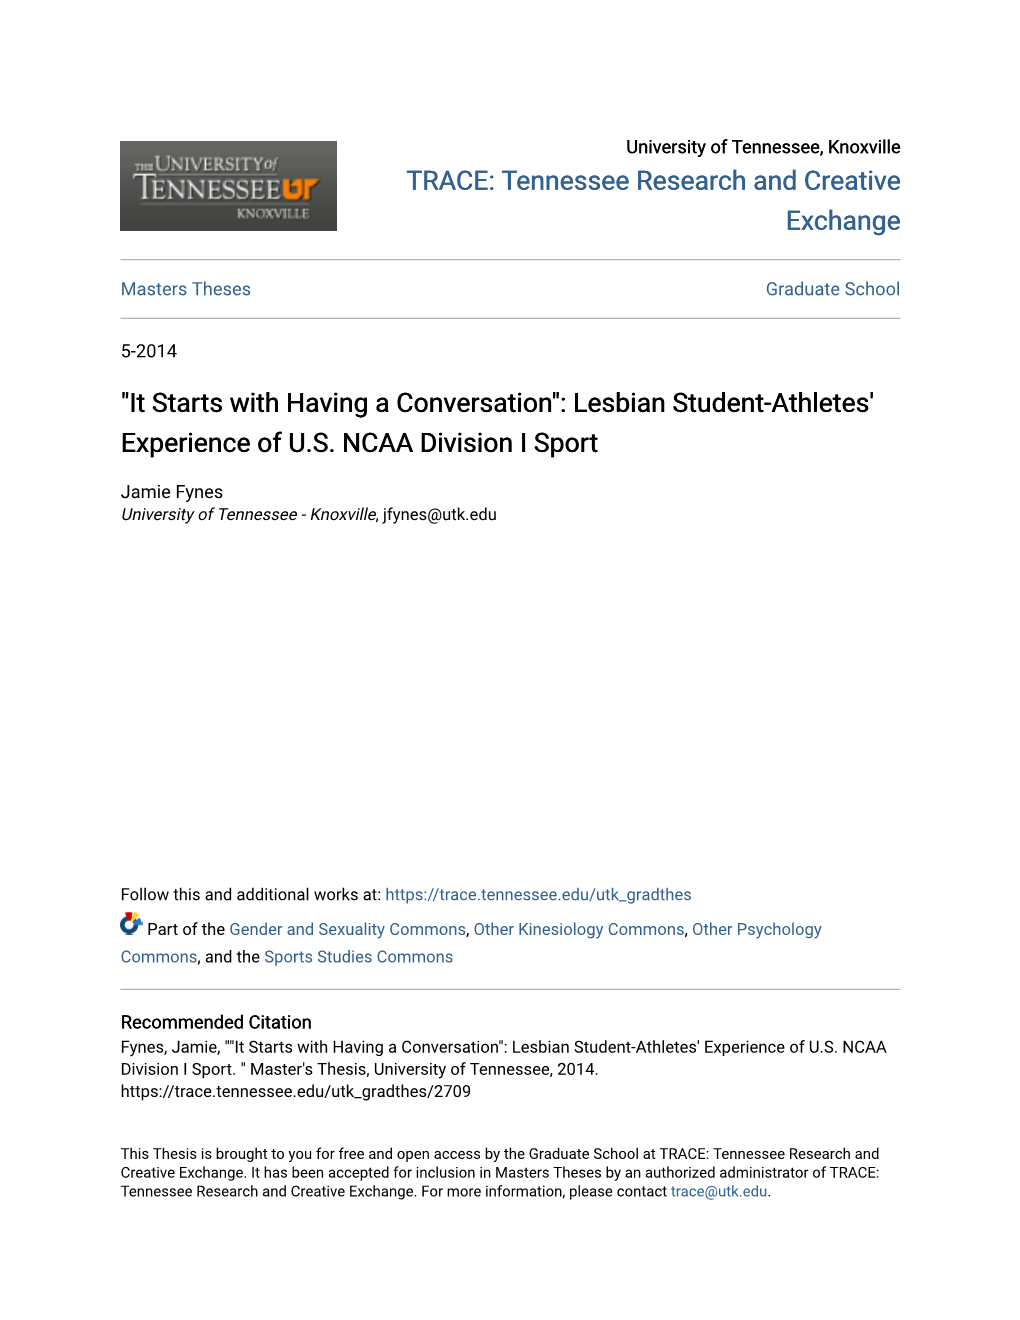 Lesbian Student-Athletes' Experience of US NCAA Division I Sport